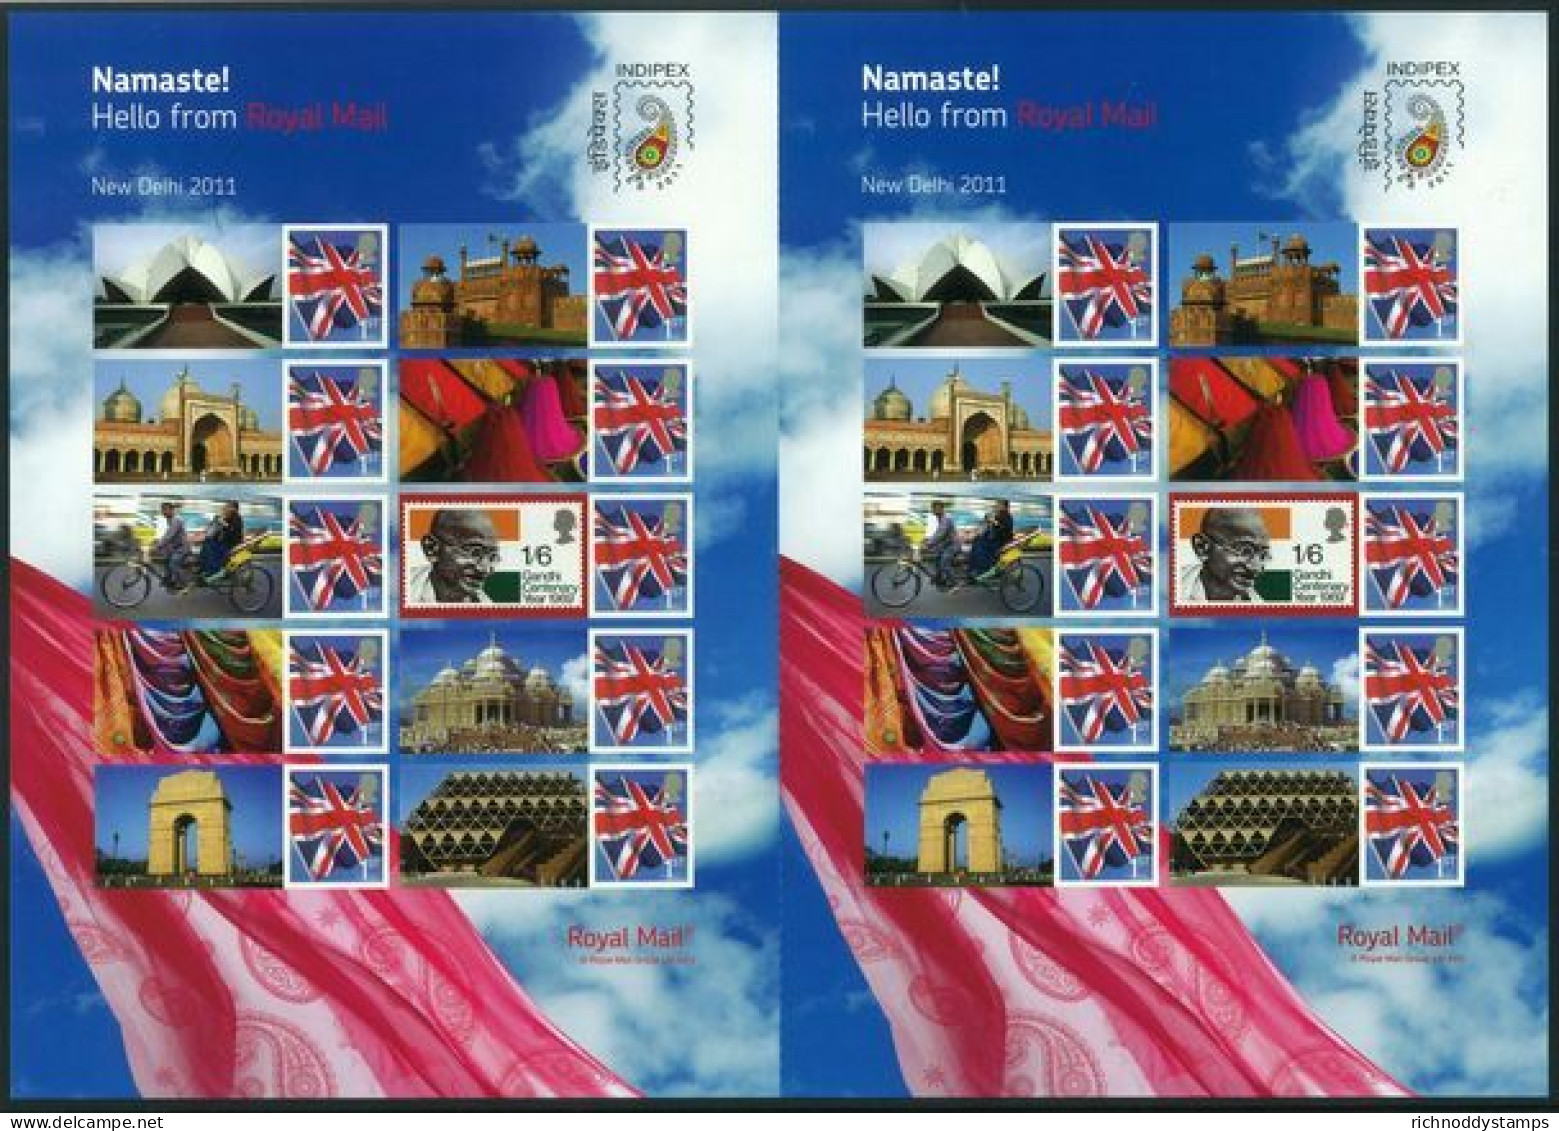 2011 Indipex Union Jack Stamps Smiler Unmounted Mint.  - Timbres Personnalisés